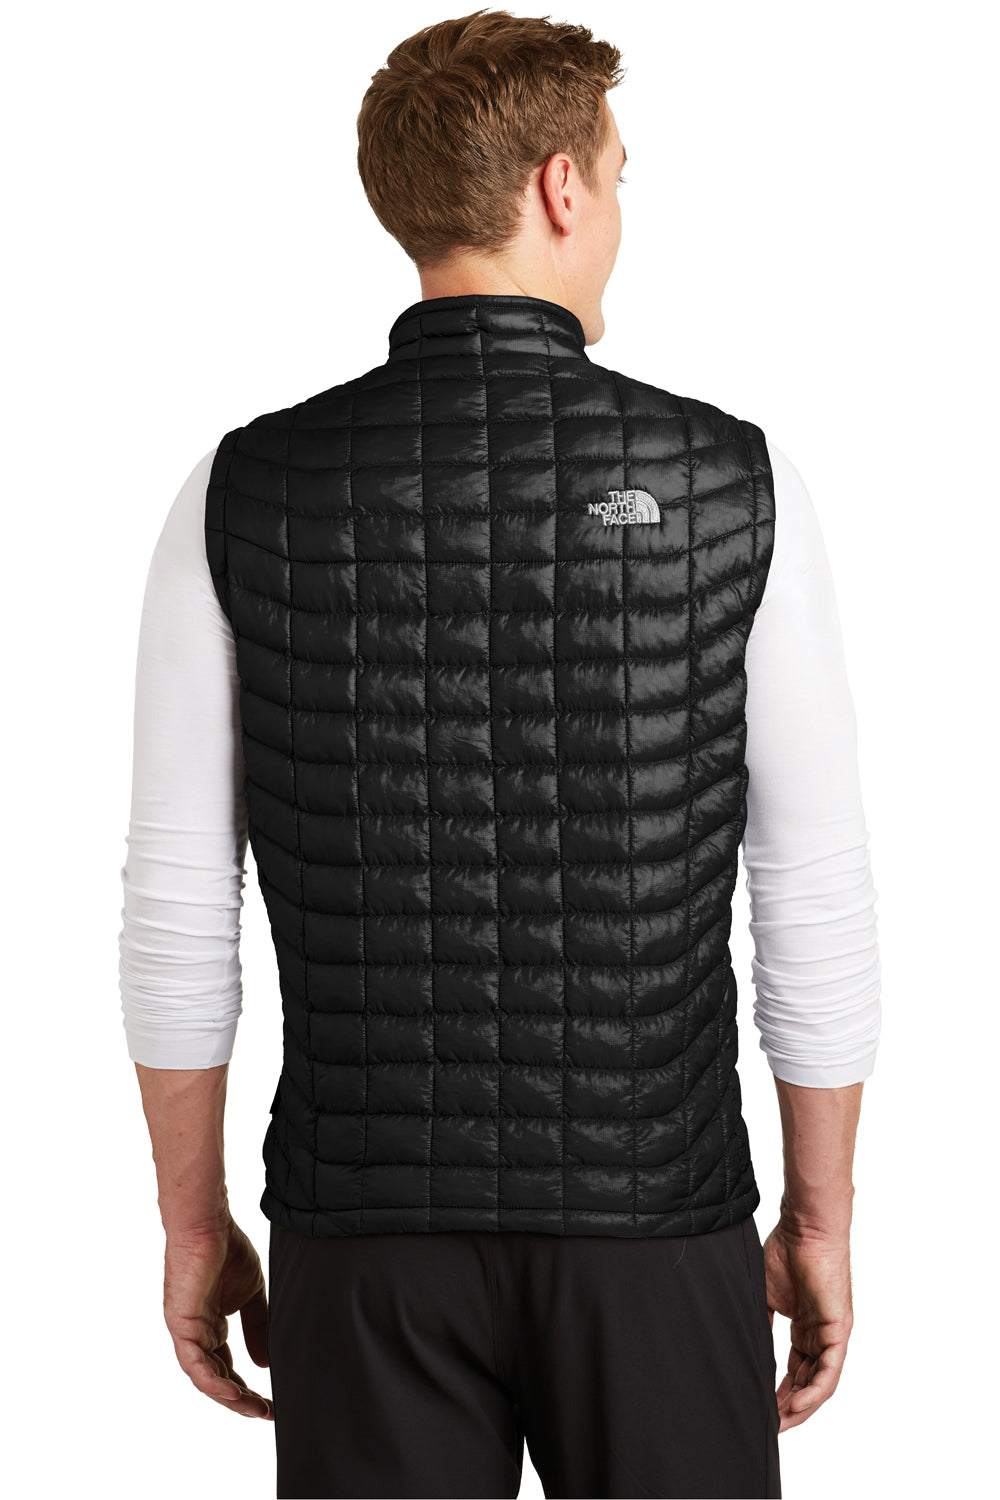 The North Face NF0A3LHD Mens ThermoBall Trekker Water Resistant Full Zip Vest Black Back